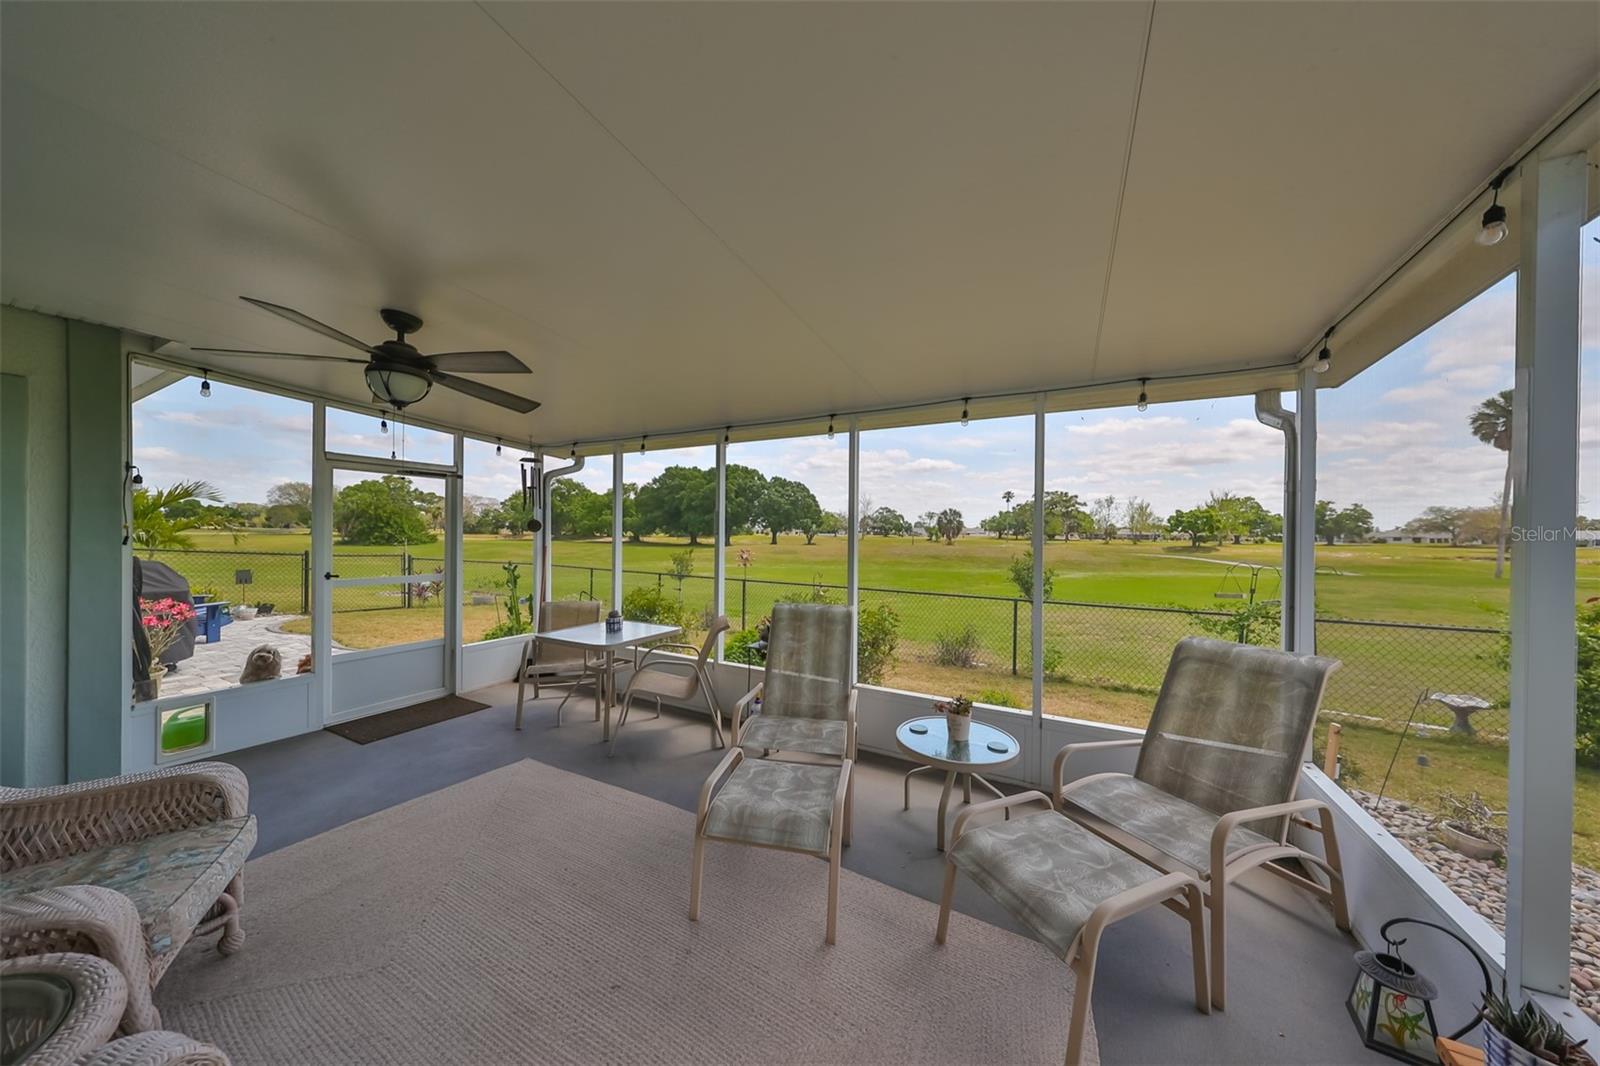 Large back patio with ceiling fan and lighting, covered and enclosed and large enough to comfortably fit in patio furniture for relaxing all year round in as you overlook the GREENBELT.  There is an open-air patio for grilling or enjoying the sun.